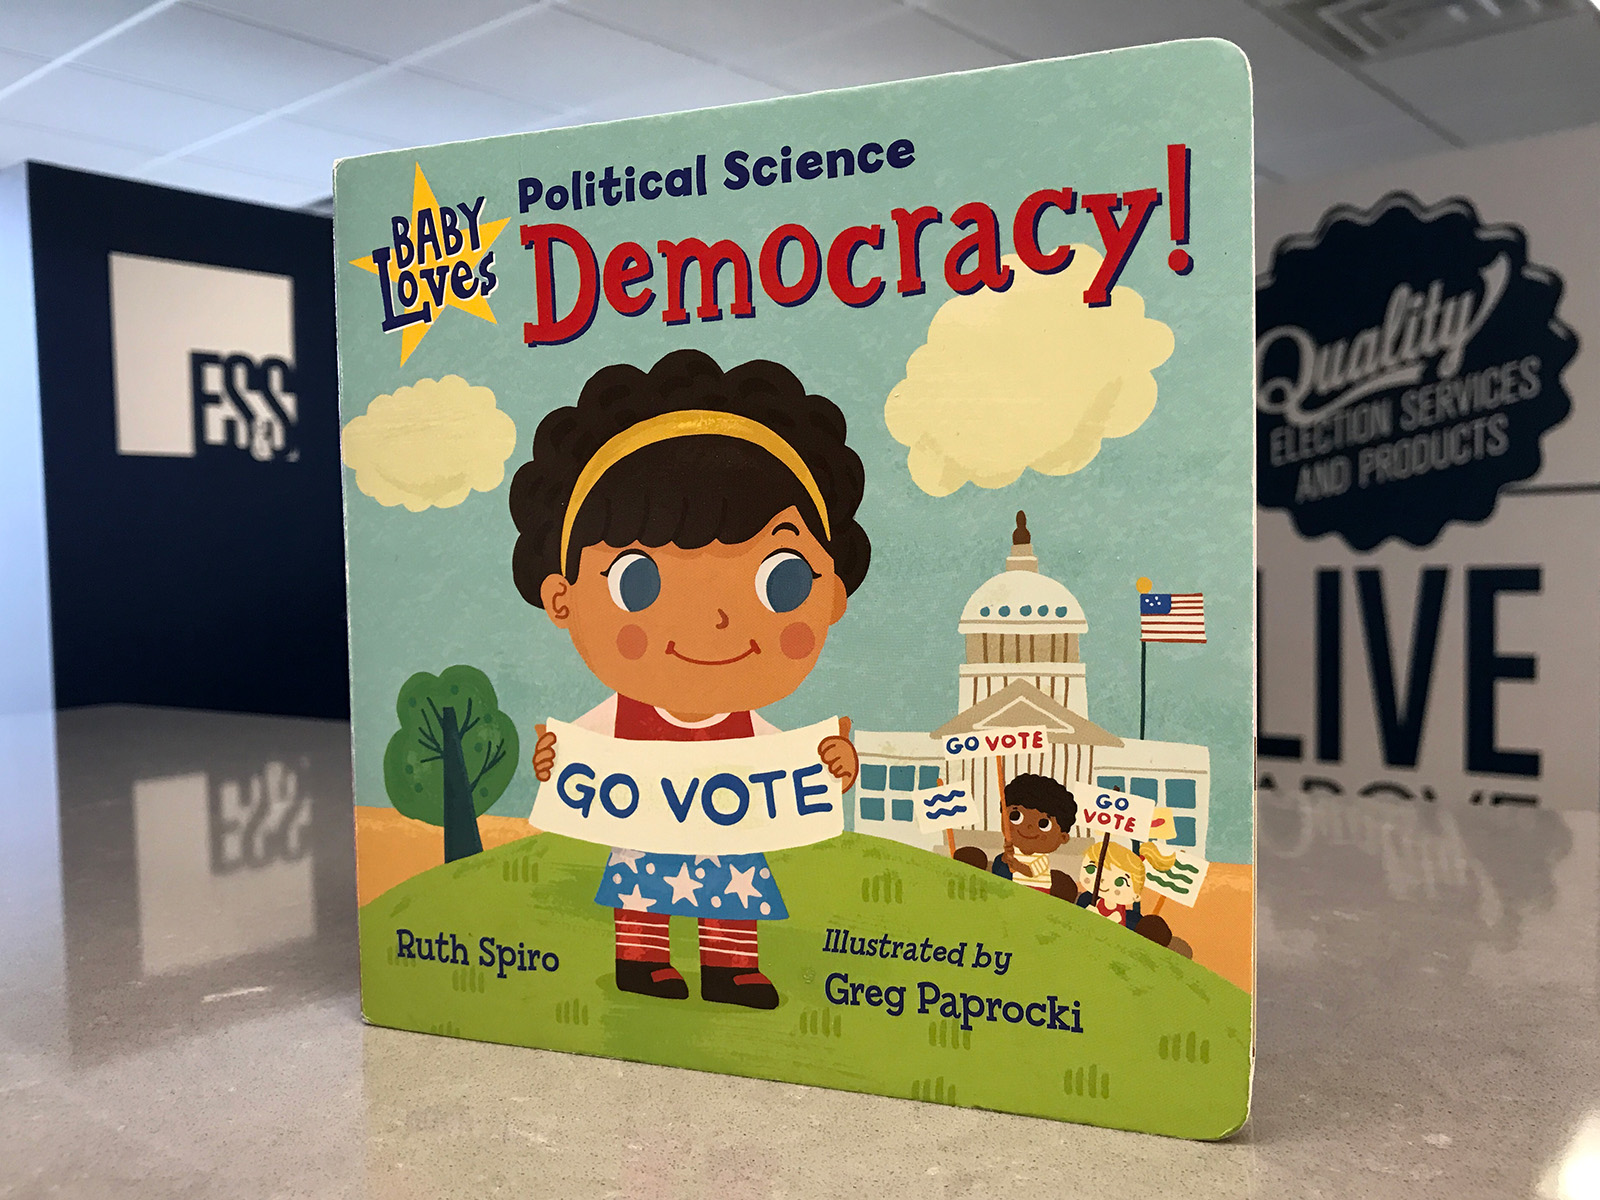 Photo of the book cover for "Baby Loves Political Science: Democracy!"